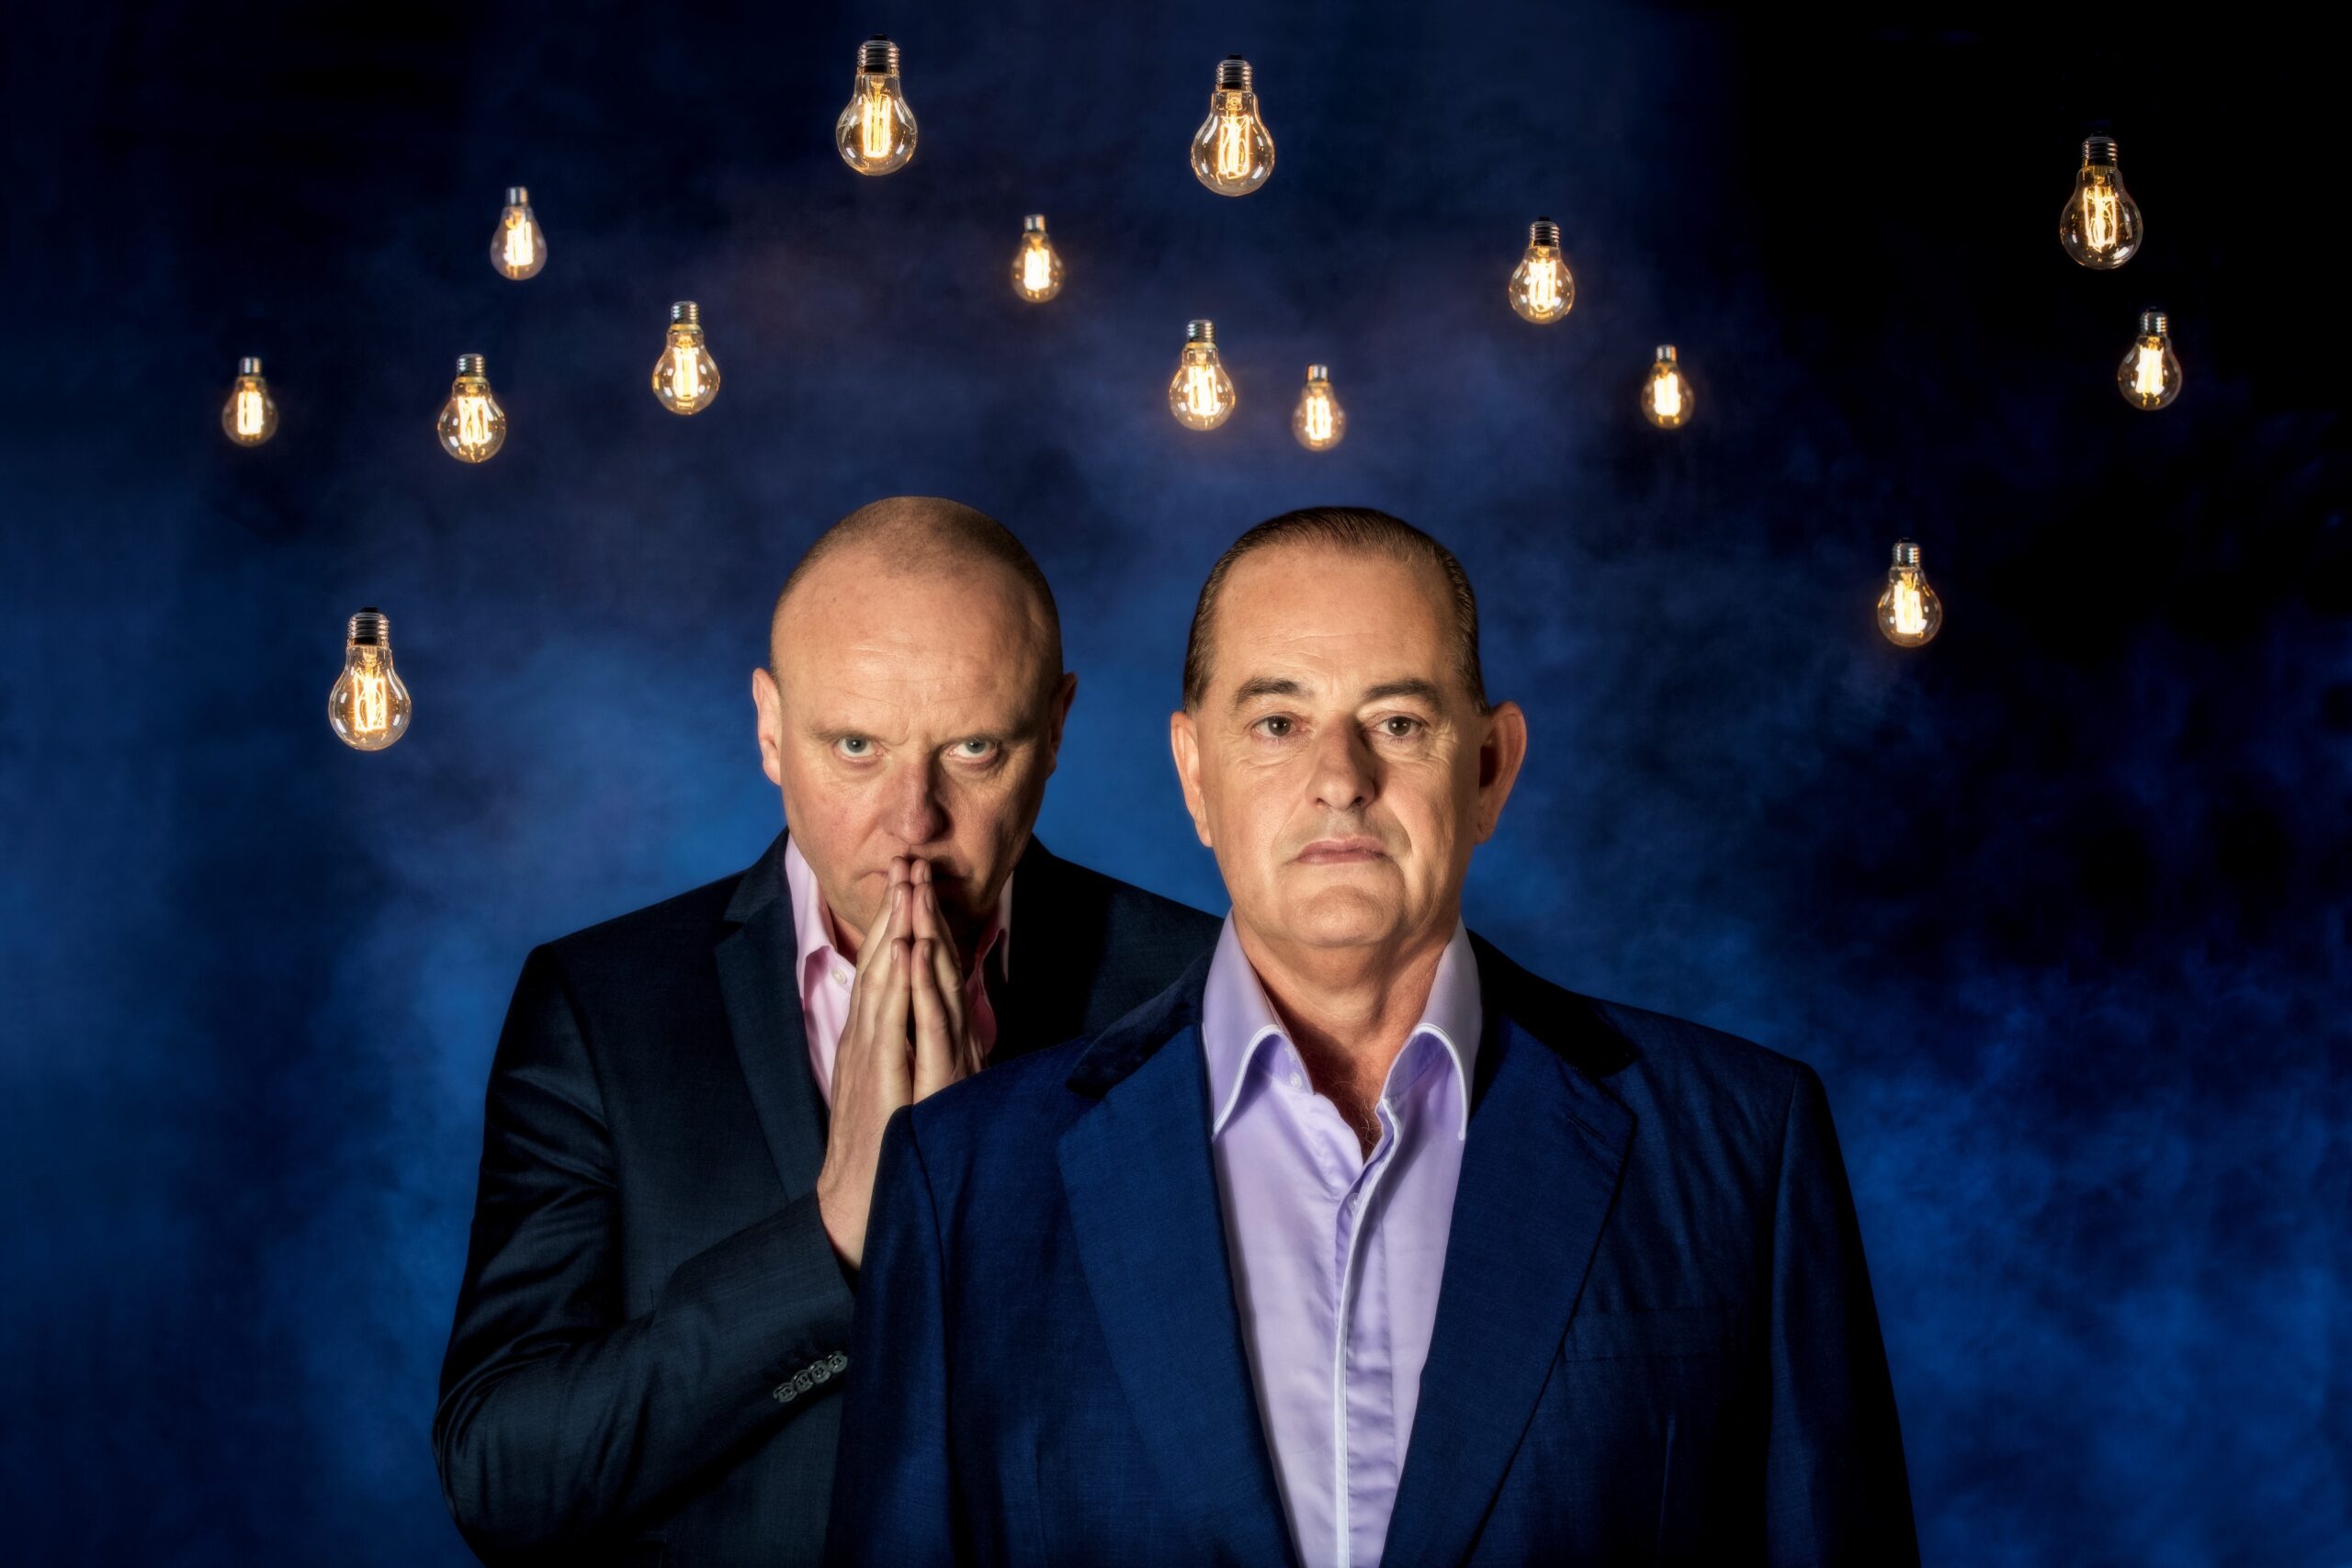 Heaven 17 announce 40th anniversary tour for ‘The Luxury Gap’